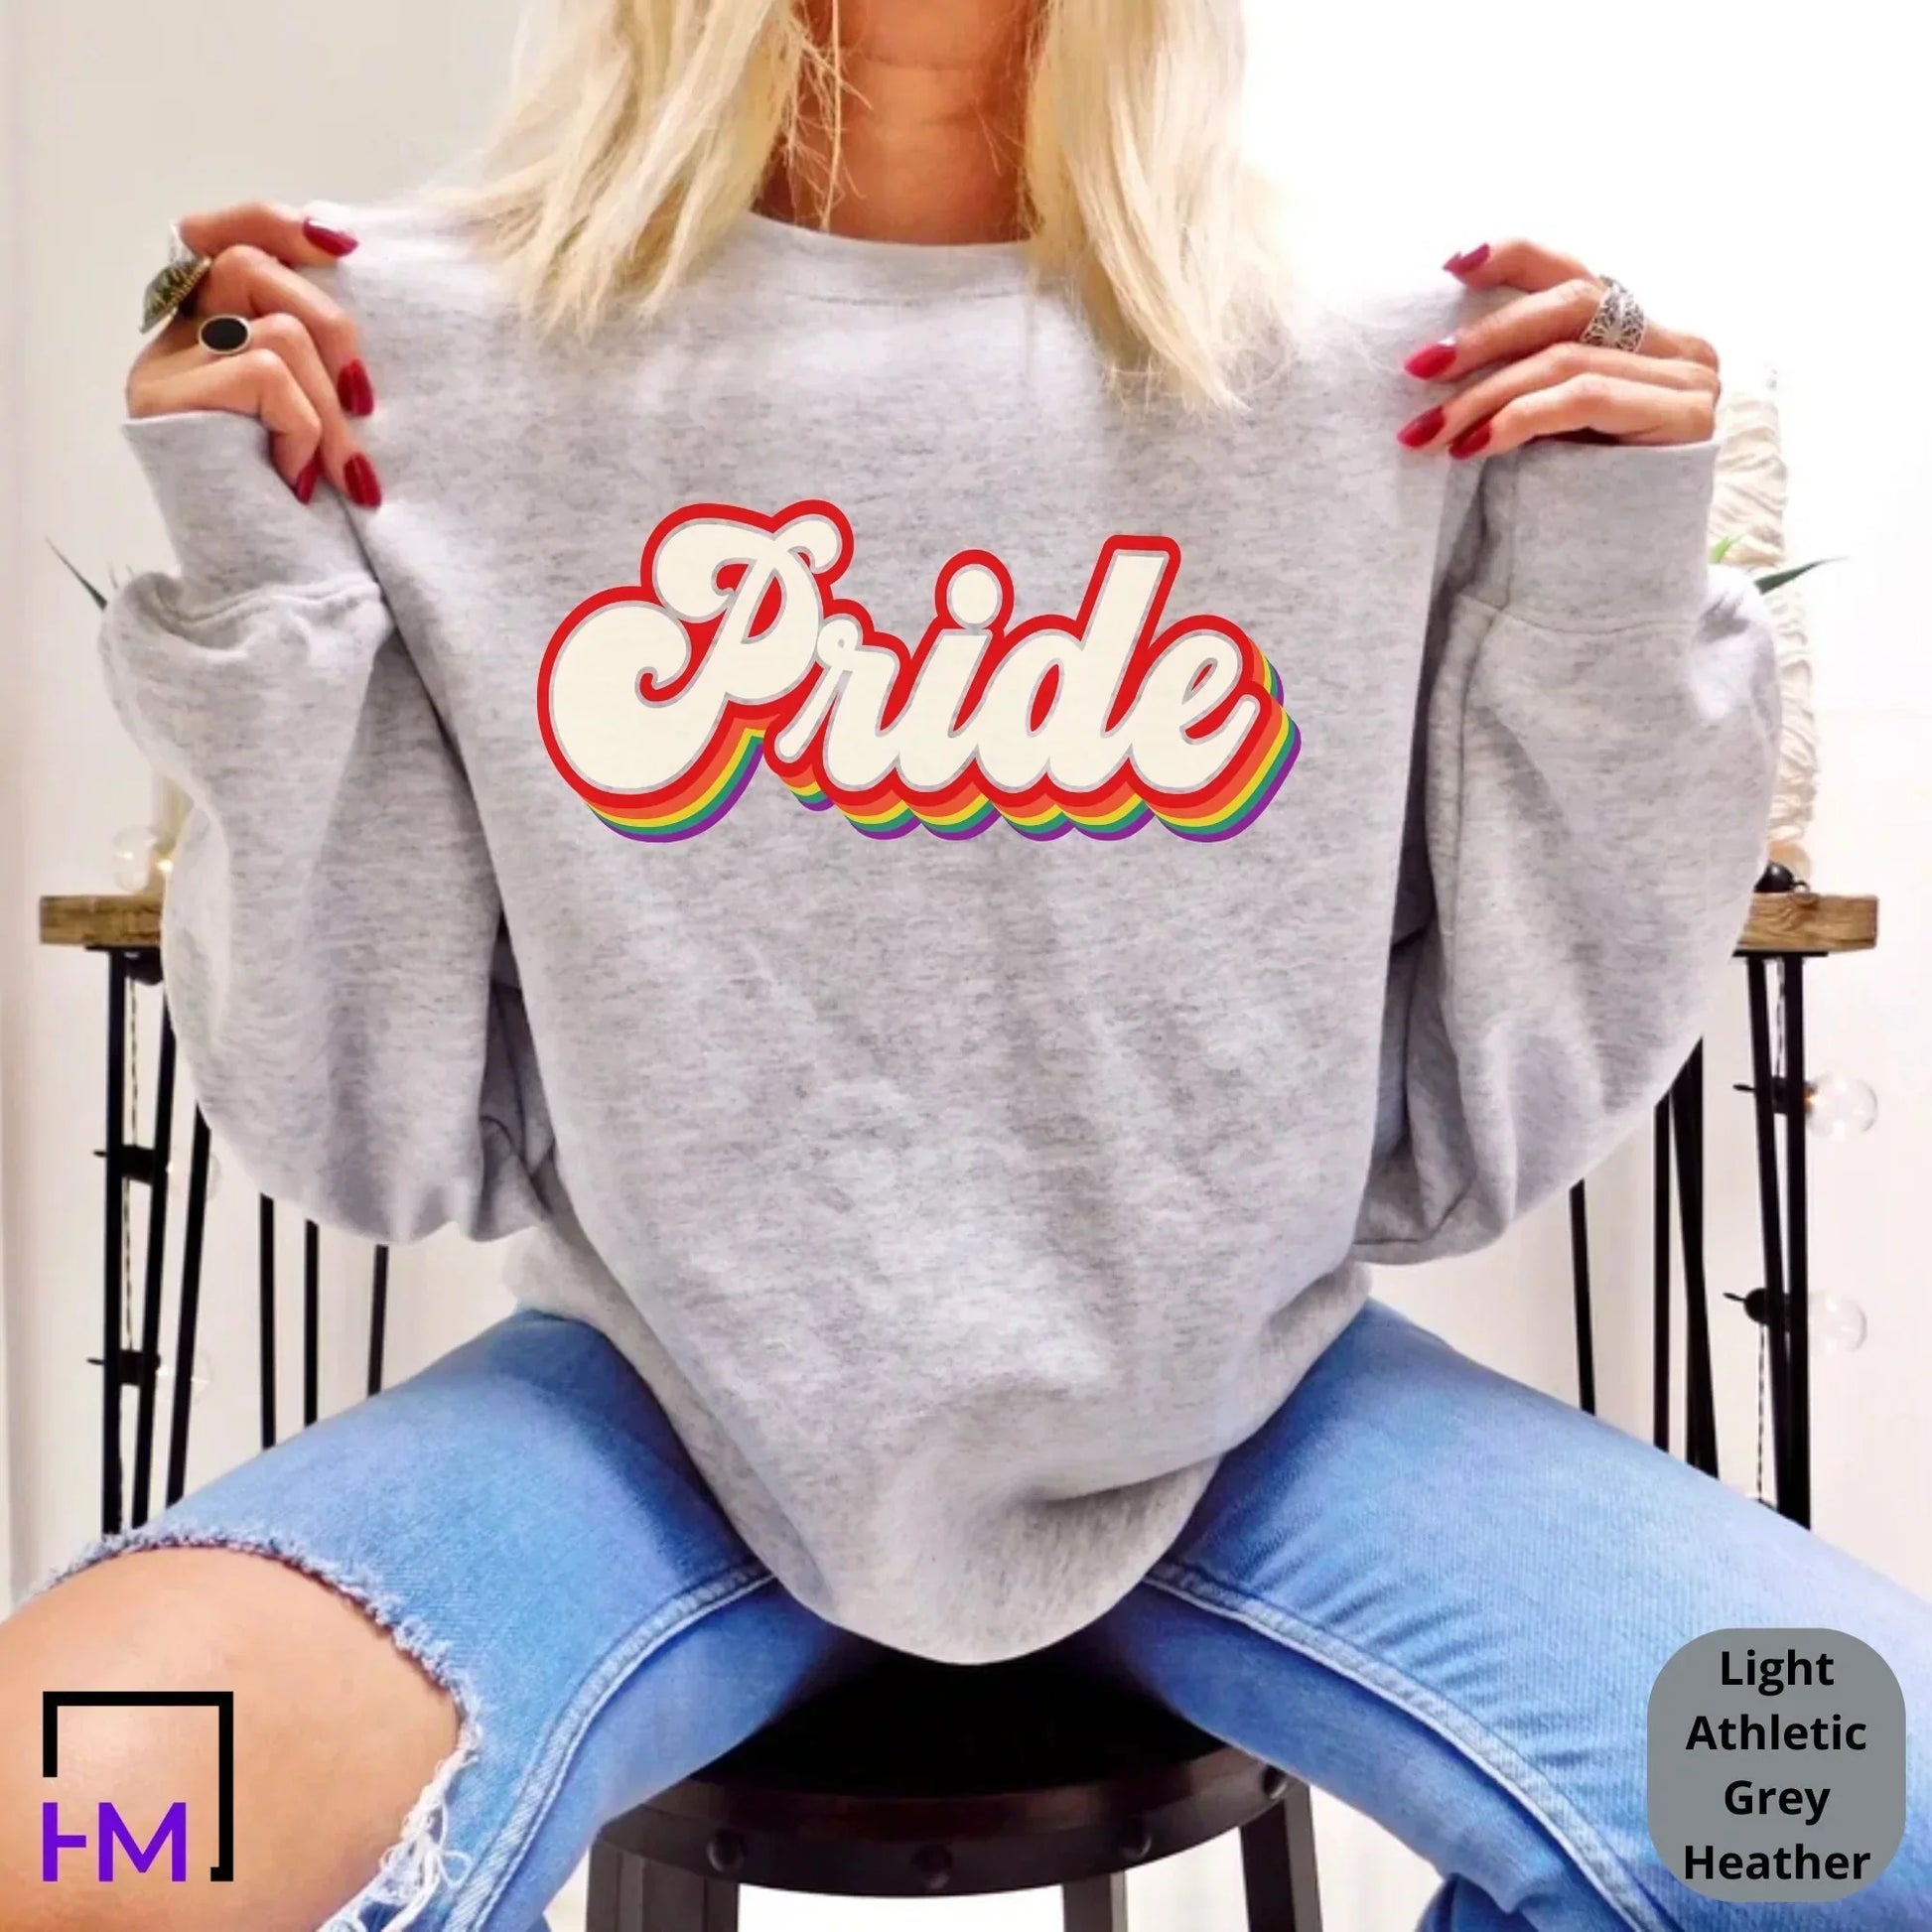 Retro Pride T-Shirts, Human Rights Equality, LGBT Shirt, Love is Love Shirt, Be Kind Gift, Kindness Graphic Tee, Gay Shirt, Men & Women Tees